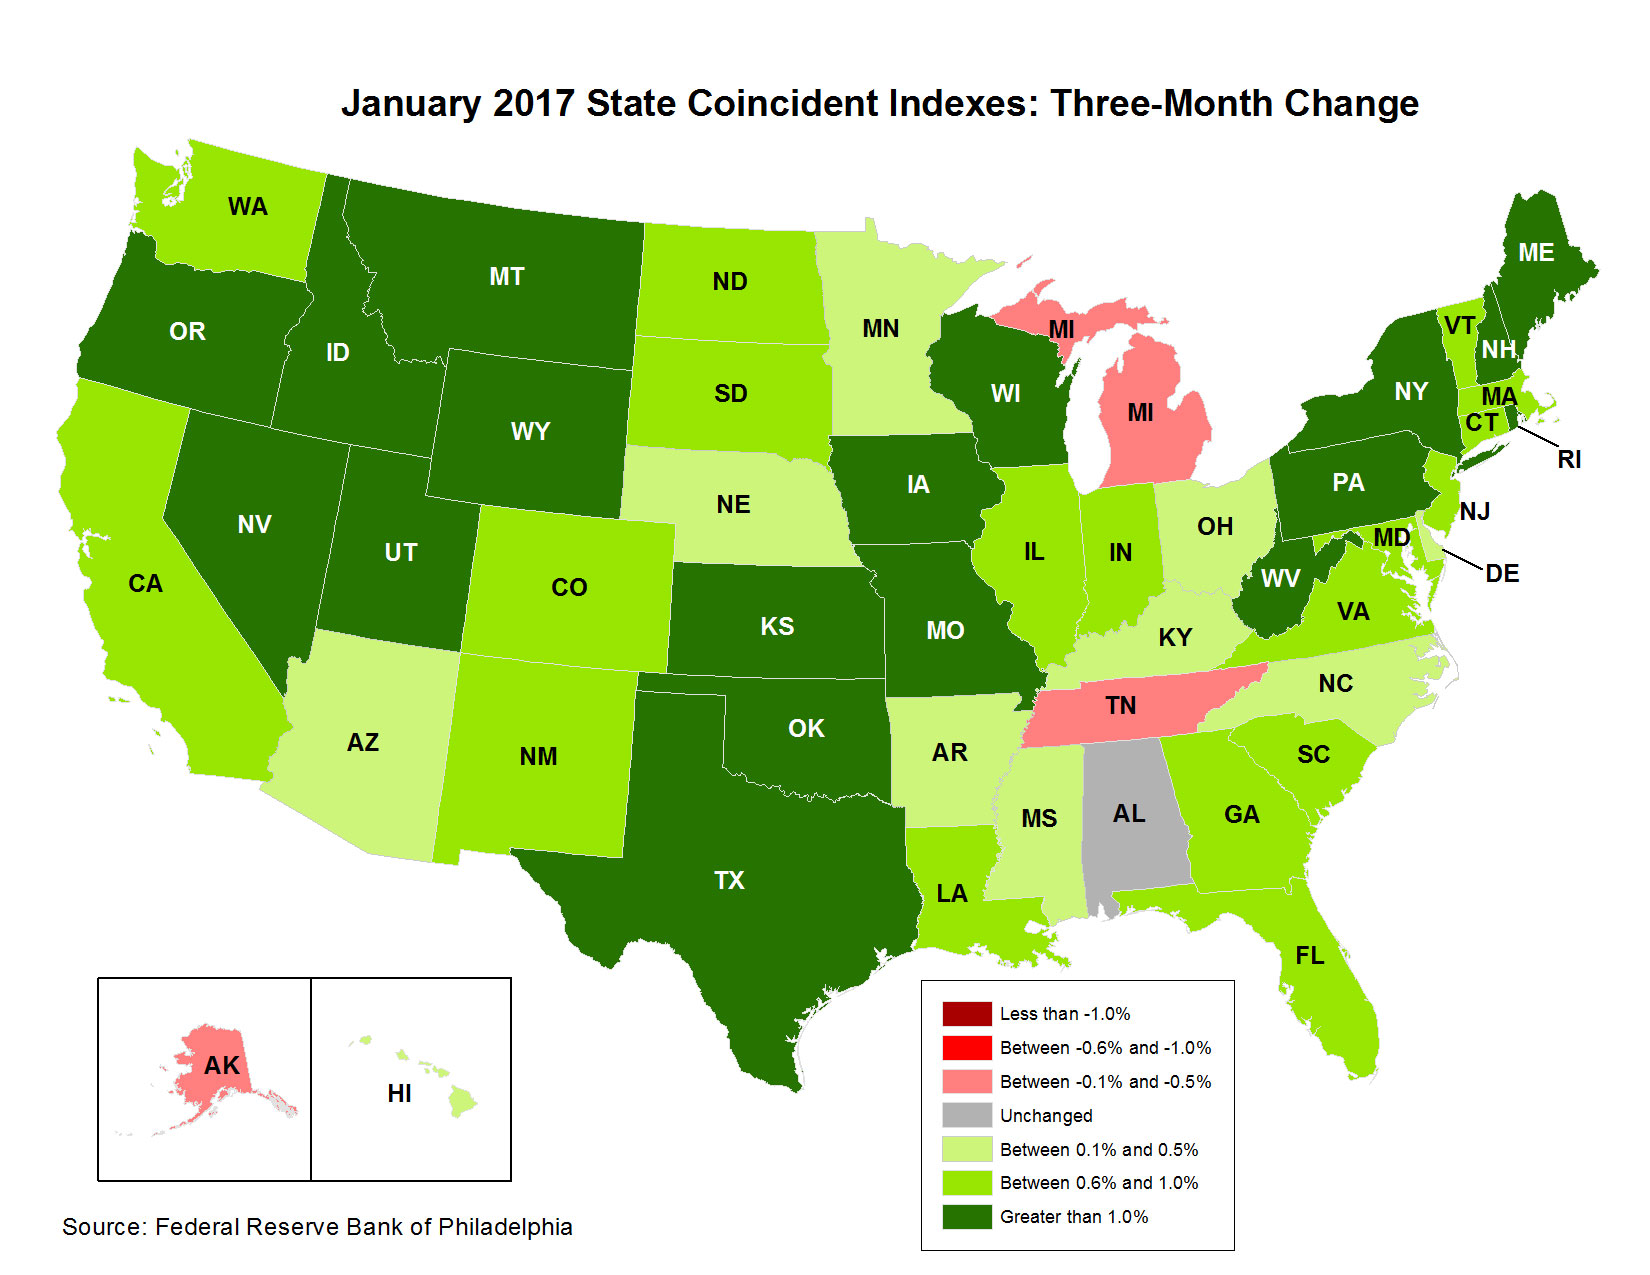 Map of the U.S. showing the State Coincident Indexes Three-Month Change in January 2017